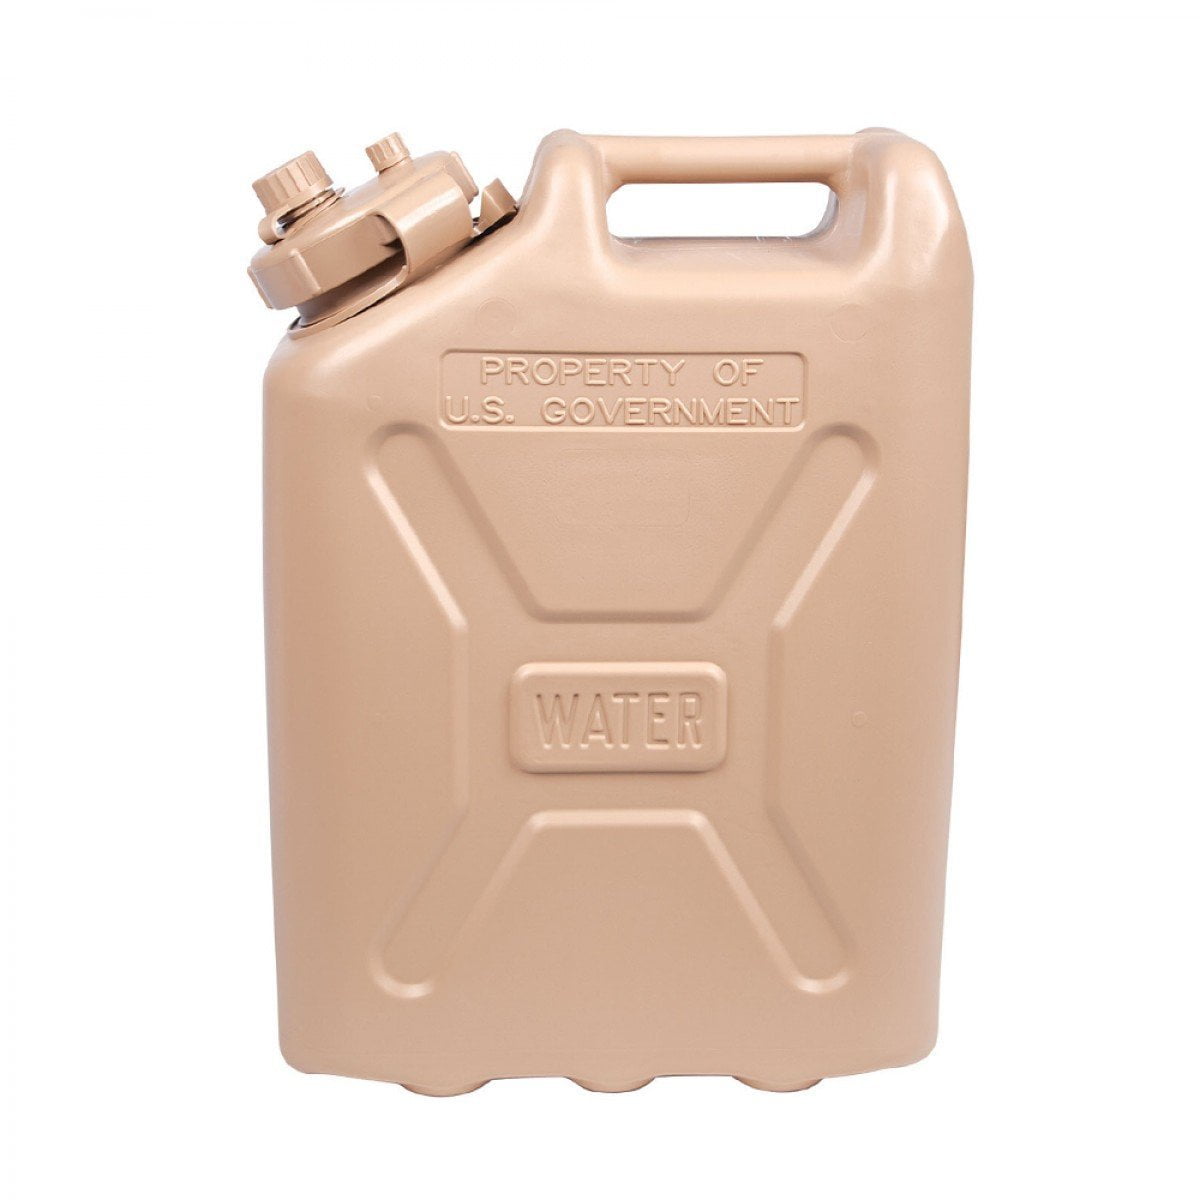 SCEPTER 06181 Water Container,5 gal.,Sand